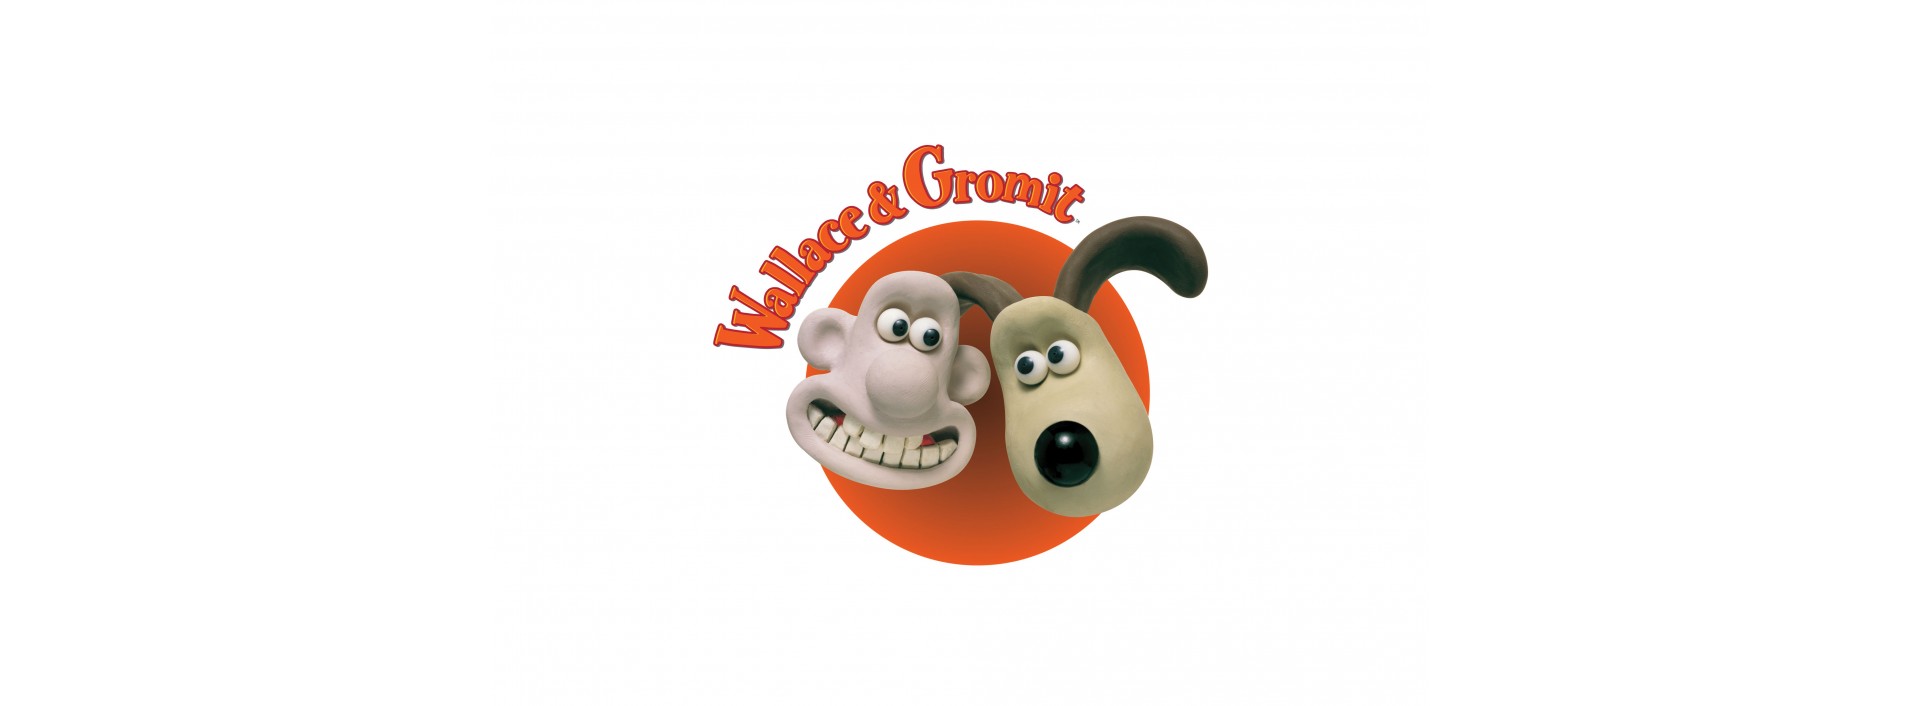 WALLACE &GROMIT